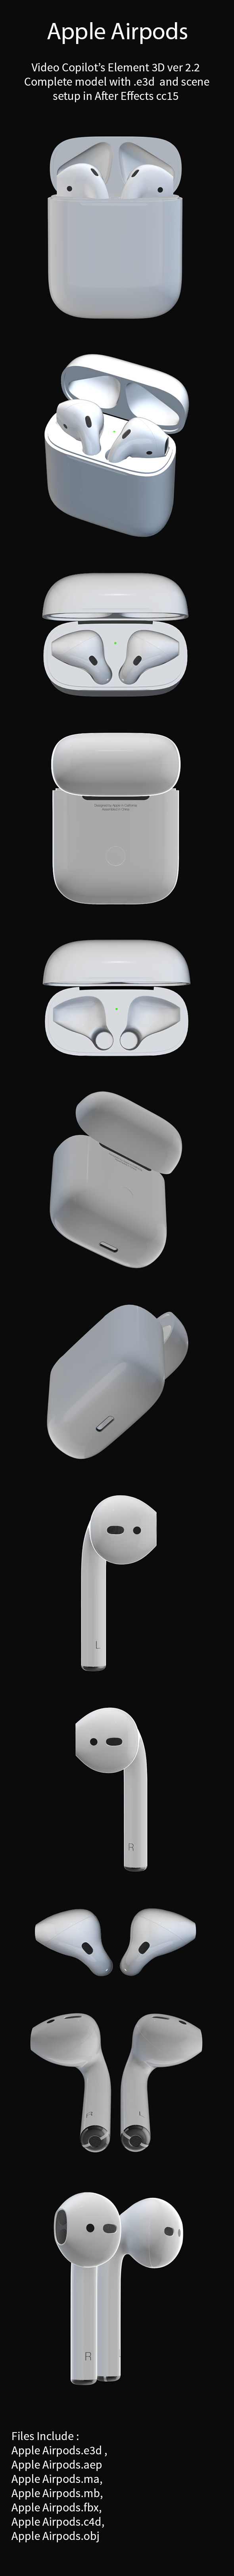 Apple AirPods with - 3Docean 22636626